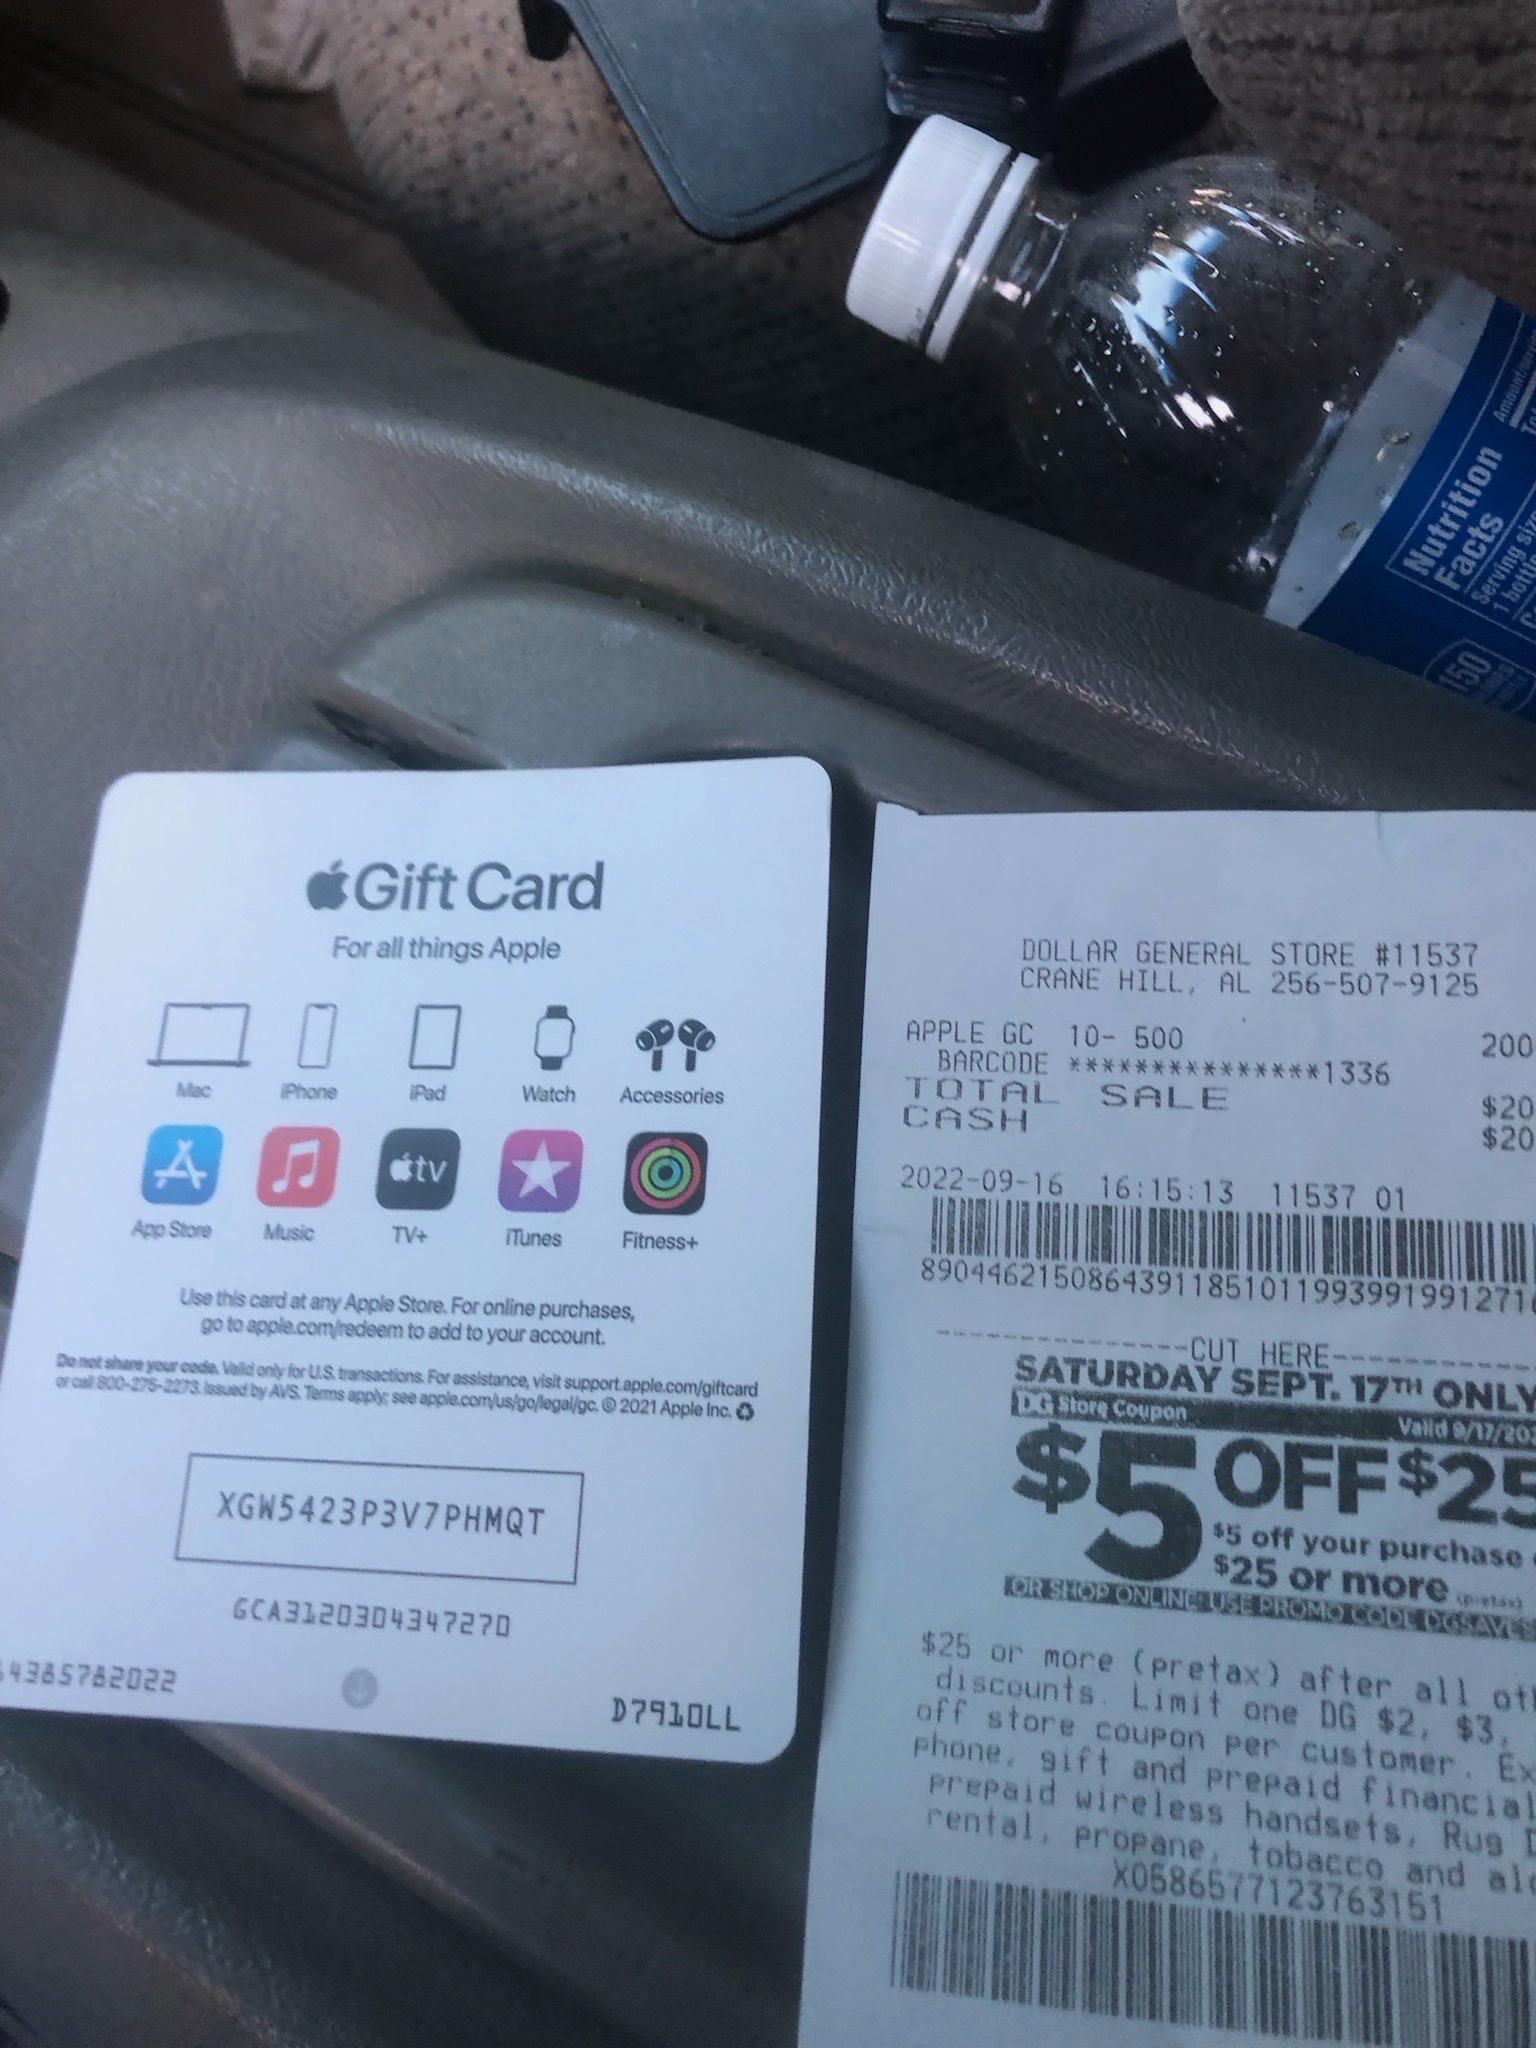 Somebody gift me an iTunes card and i cou… - Apple Community